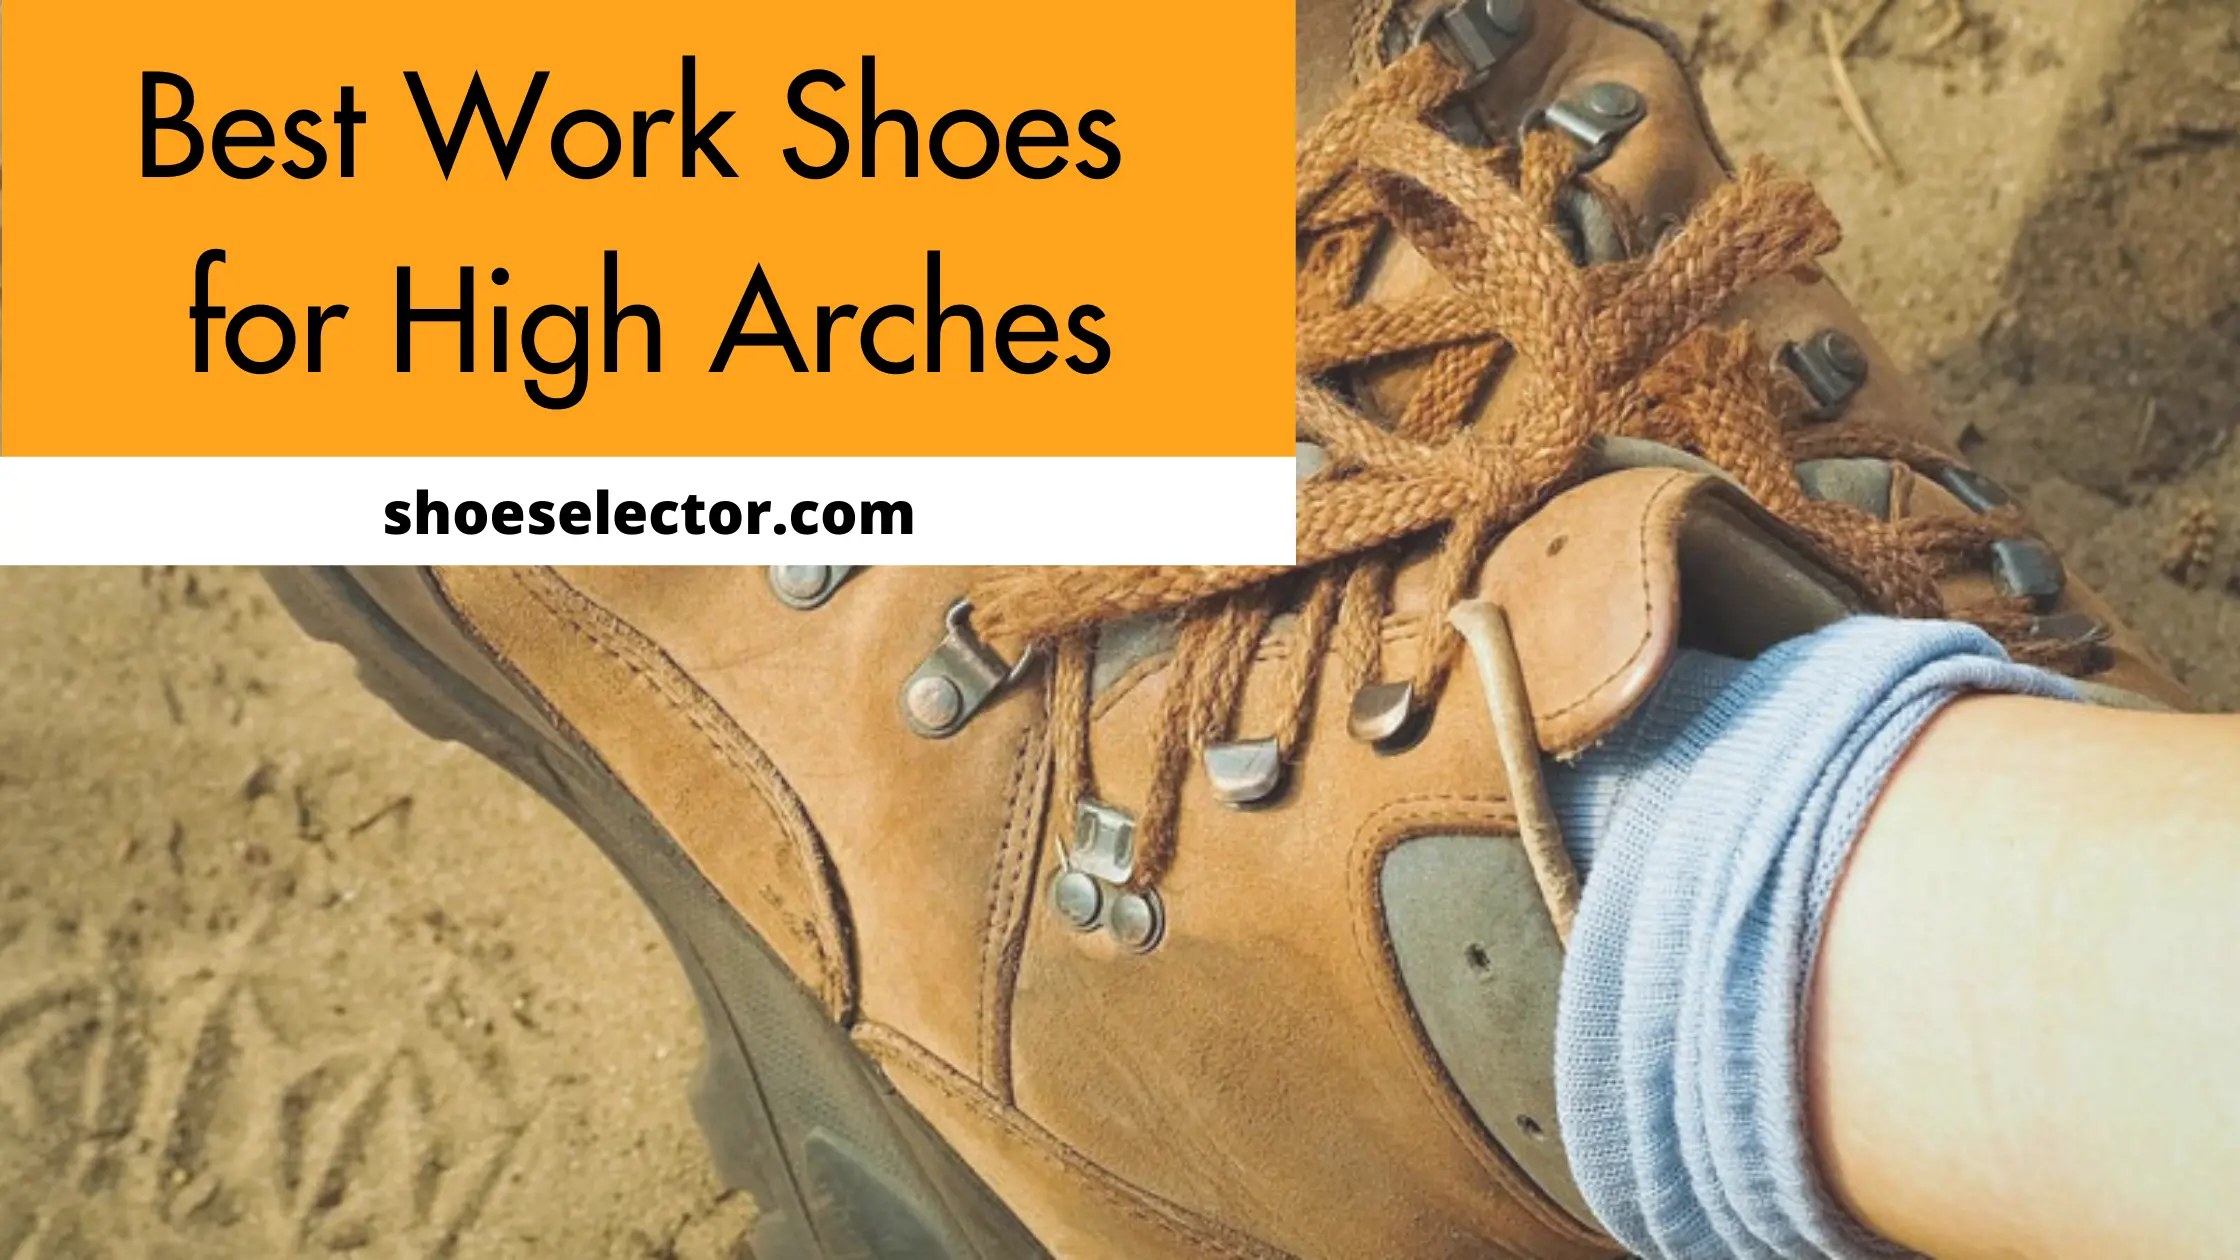 Best Work Shoes For High Arches - Top Expert's Choice